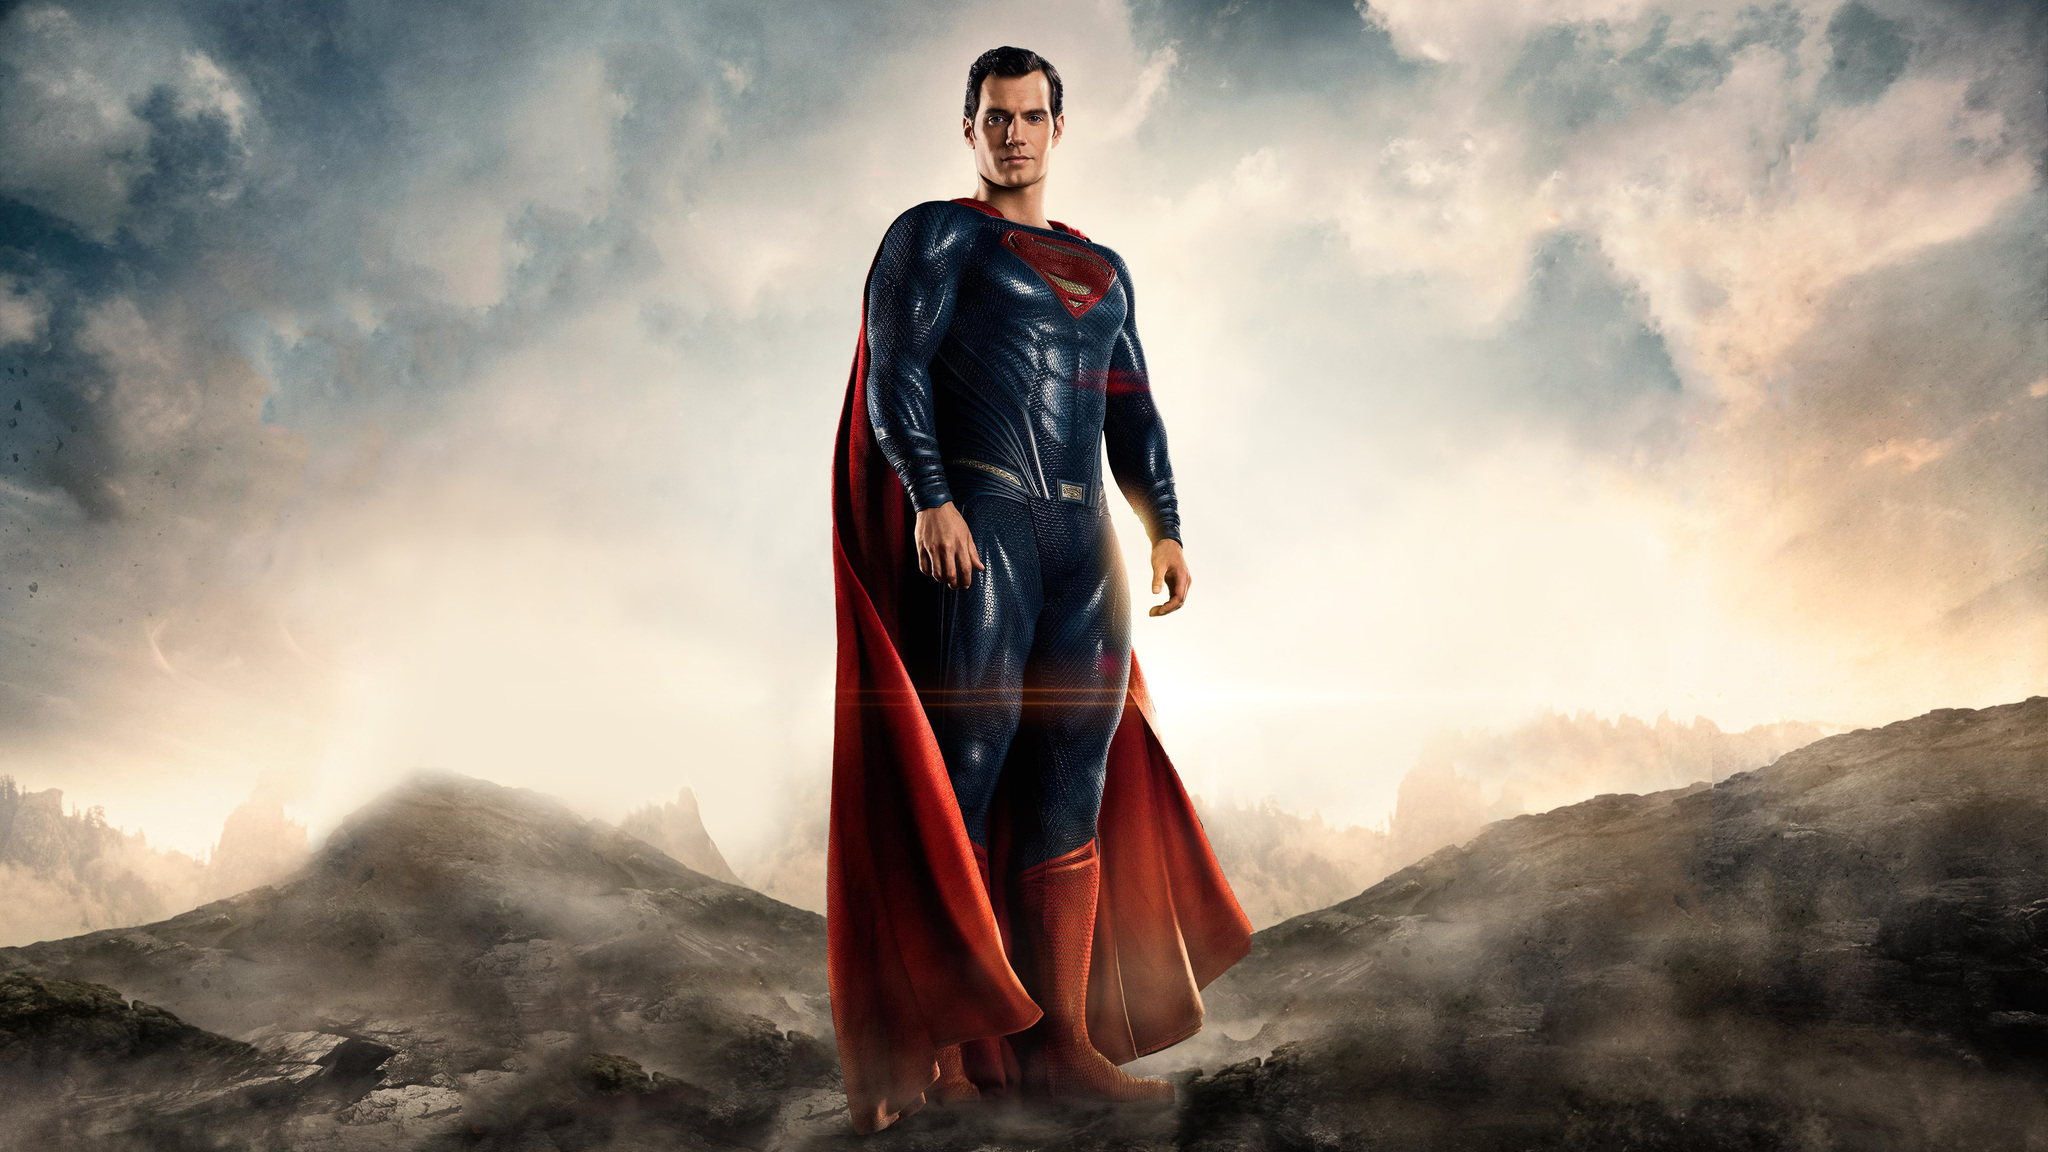 Justice League Superman 4k In 2048x1152 Resolution. justice-league-superman-4k-ki.jpg. 